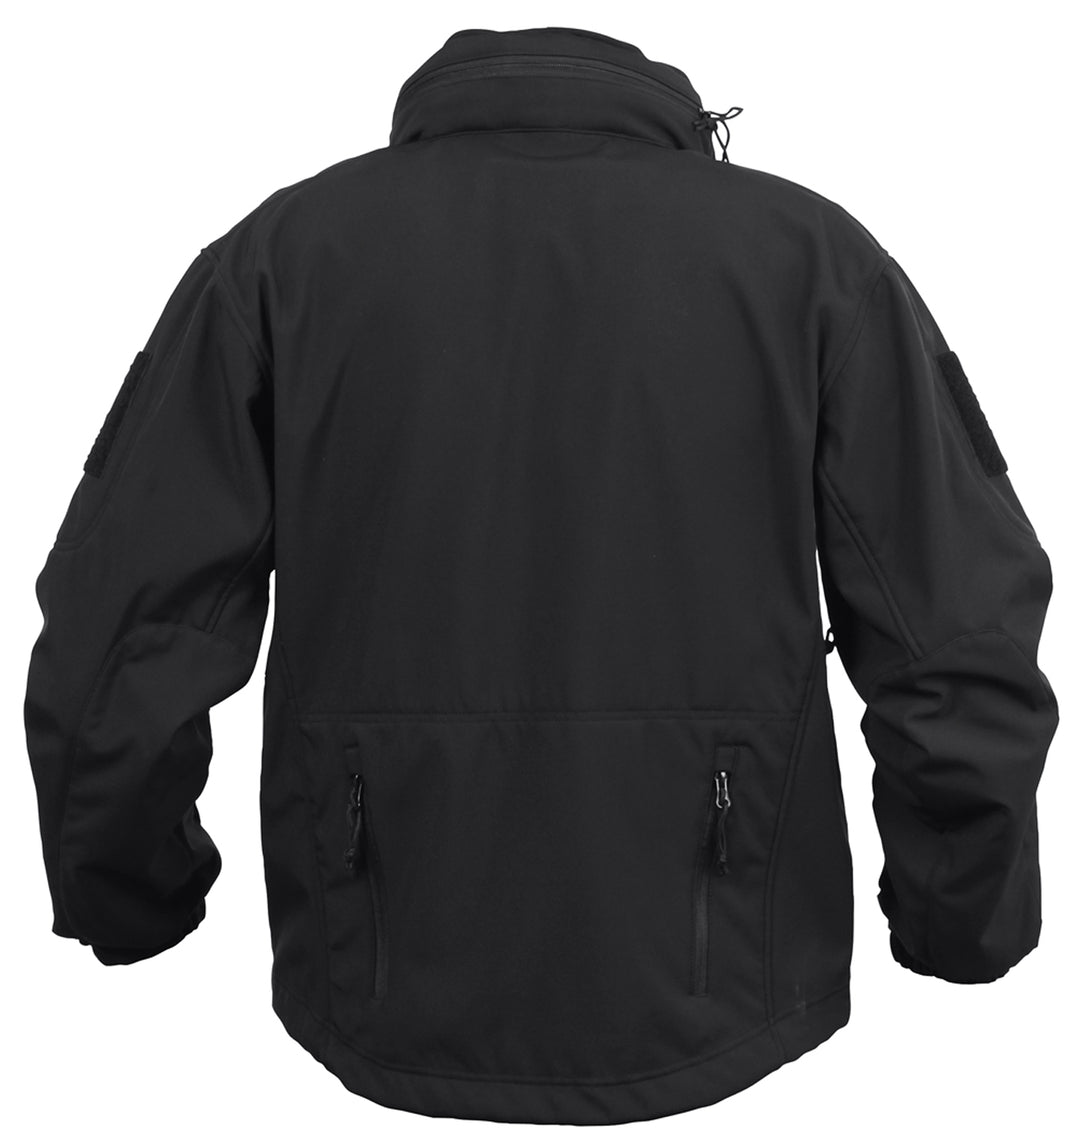 Rothco Mens Concealed Carry Soft Shell Jacket (Black) Size LARGE - Final Sale Ships Same Day